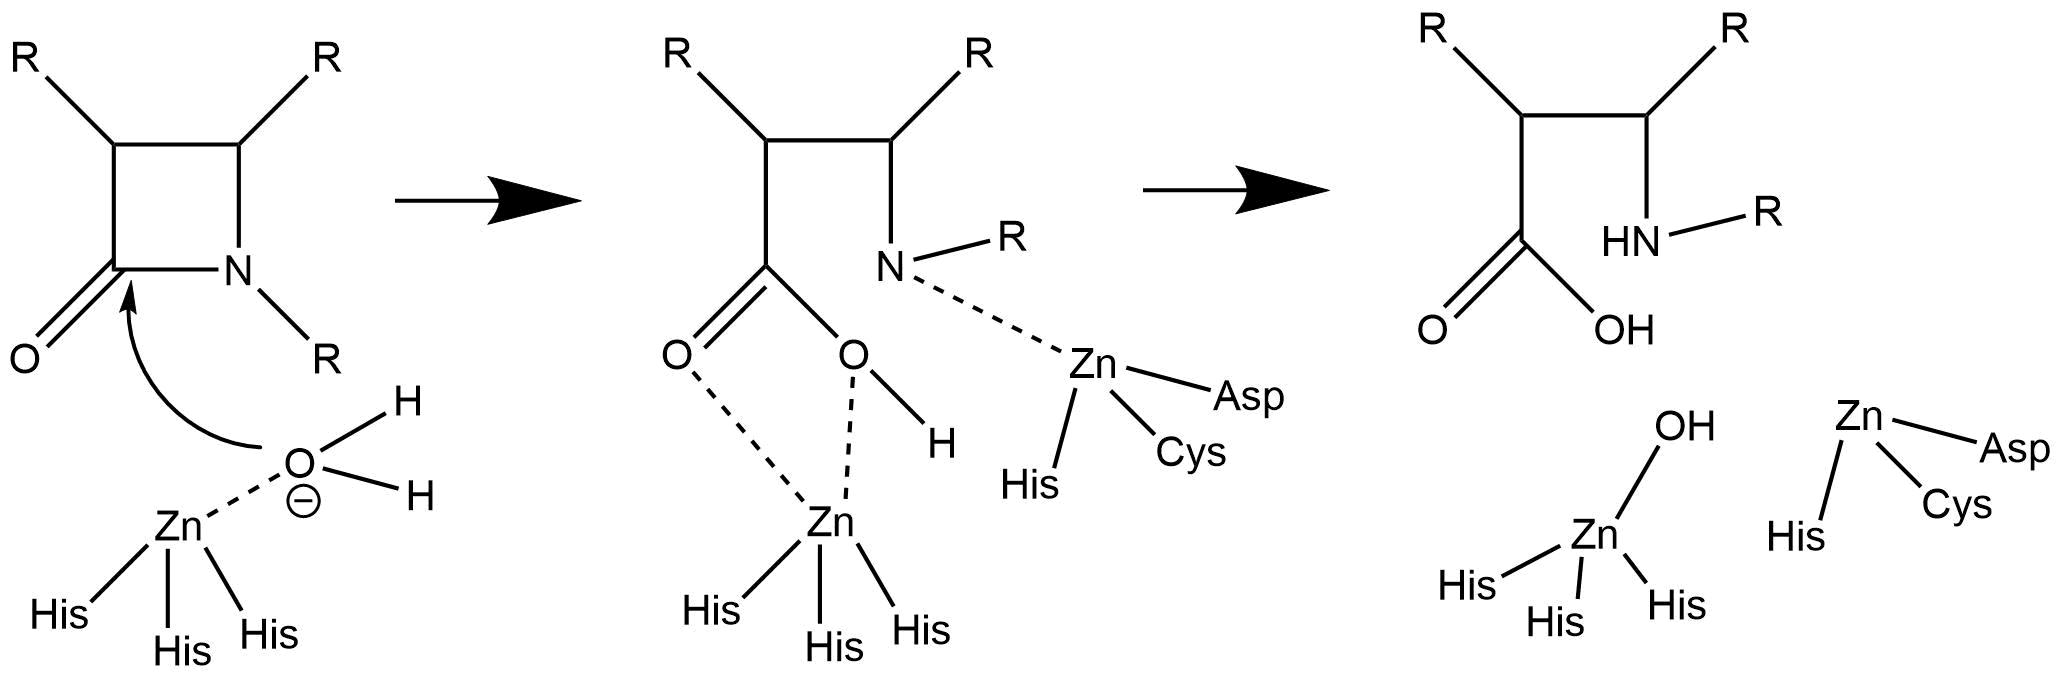 Second proposed mechanism for the hydrolysis of beta-lactam antibiotics by the zinc ions and nucleophilic water molecule present in the active site of NDM-1.